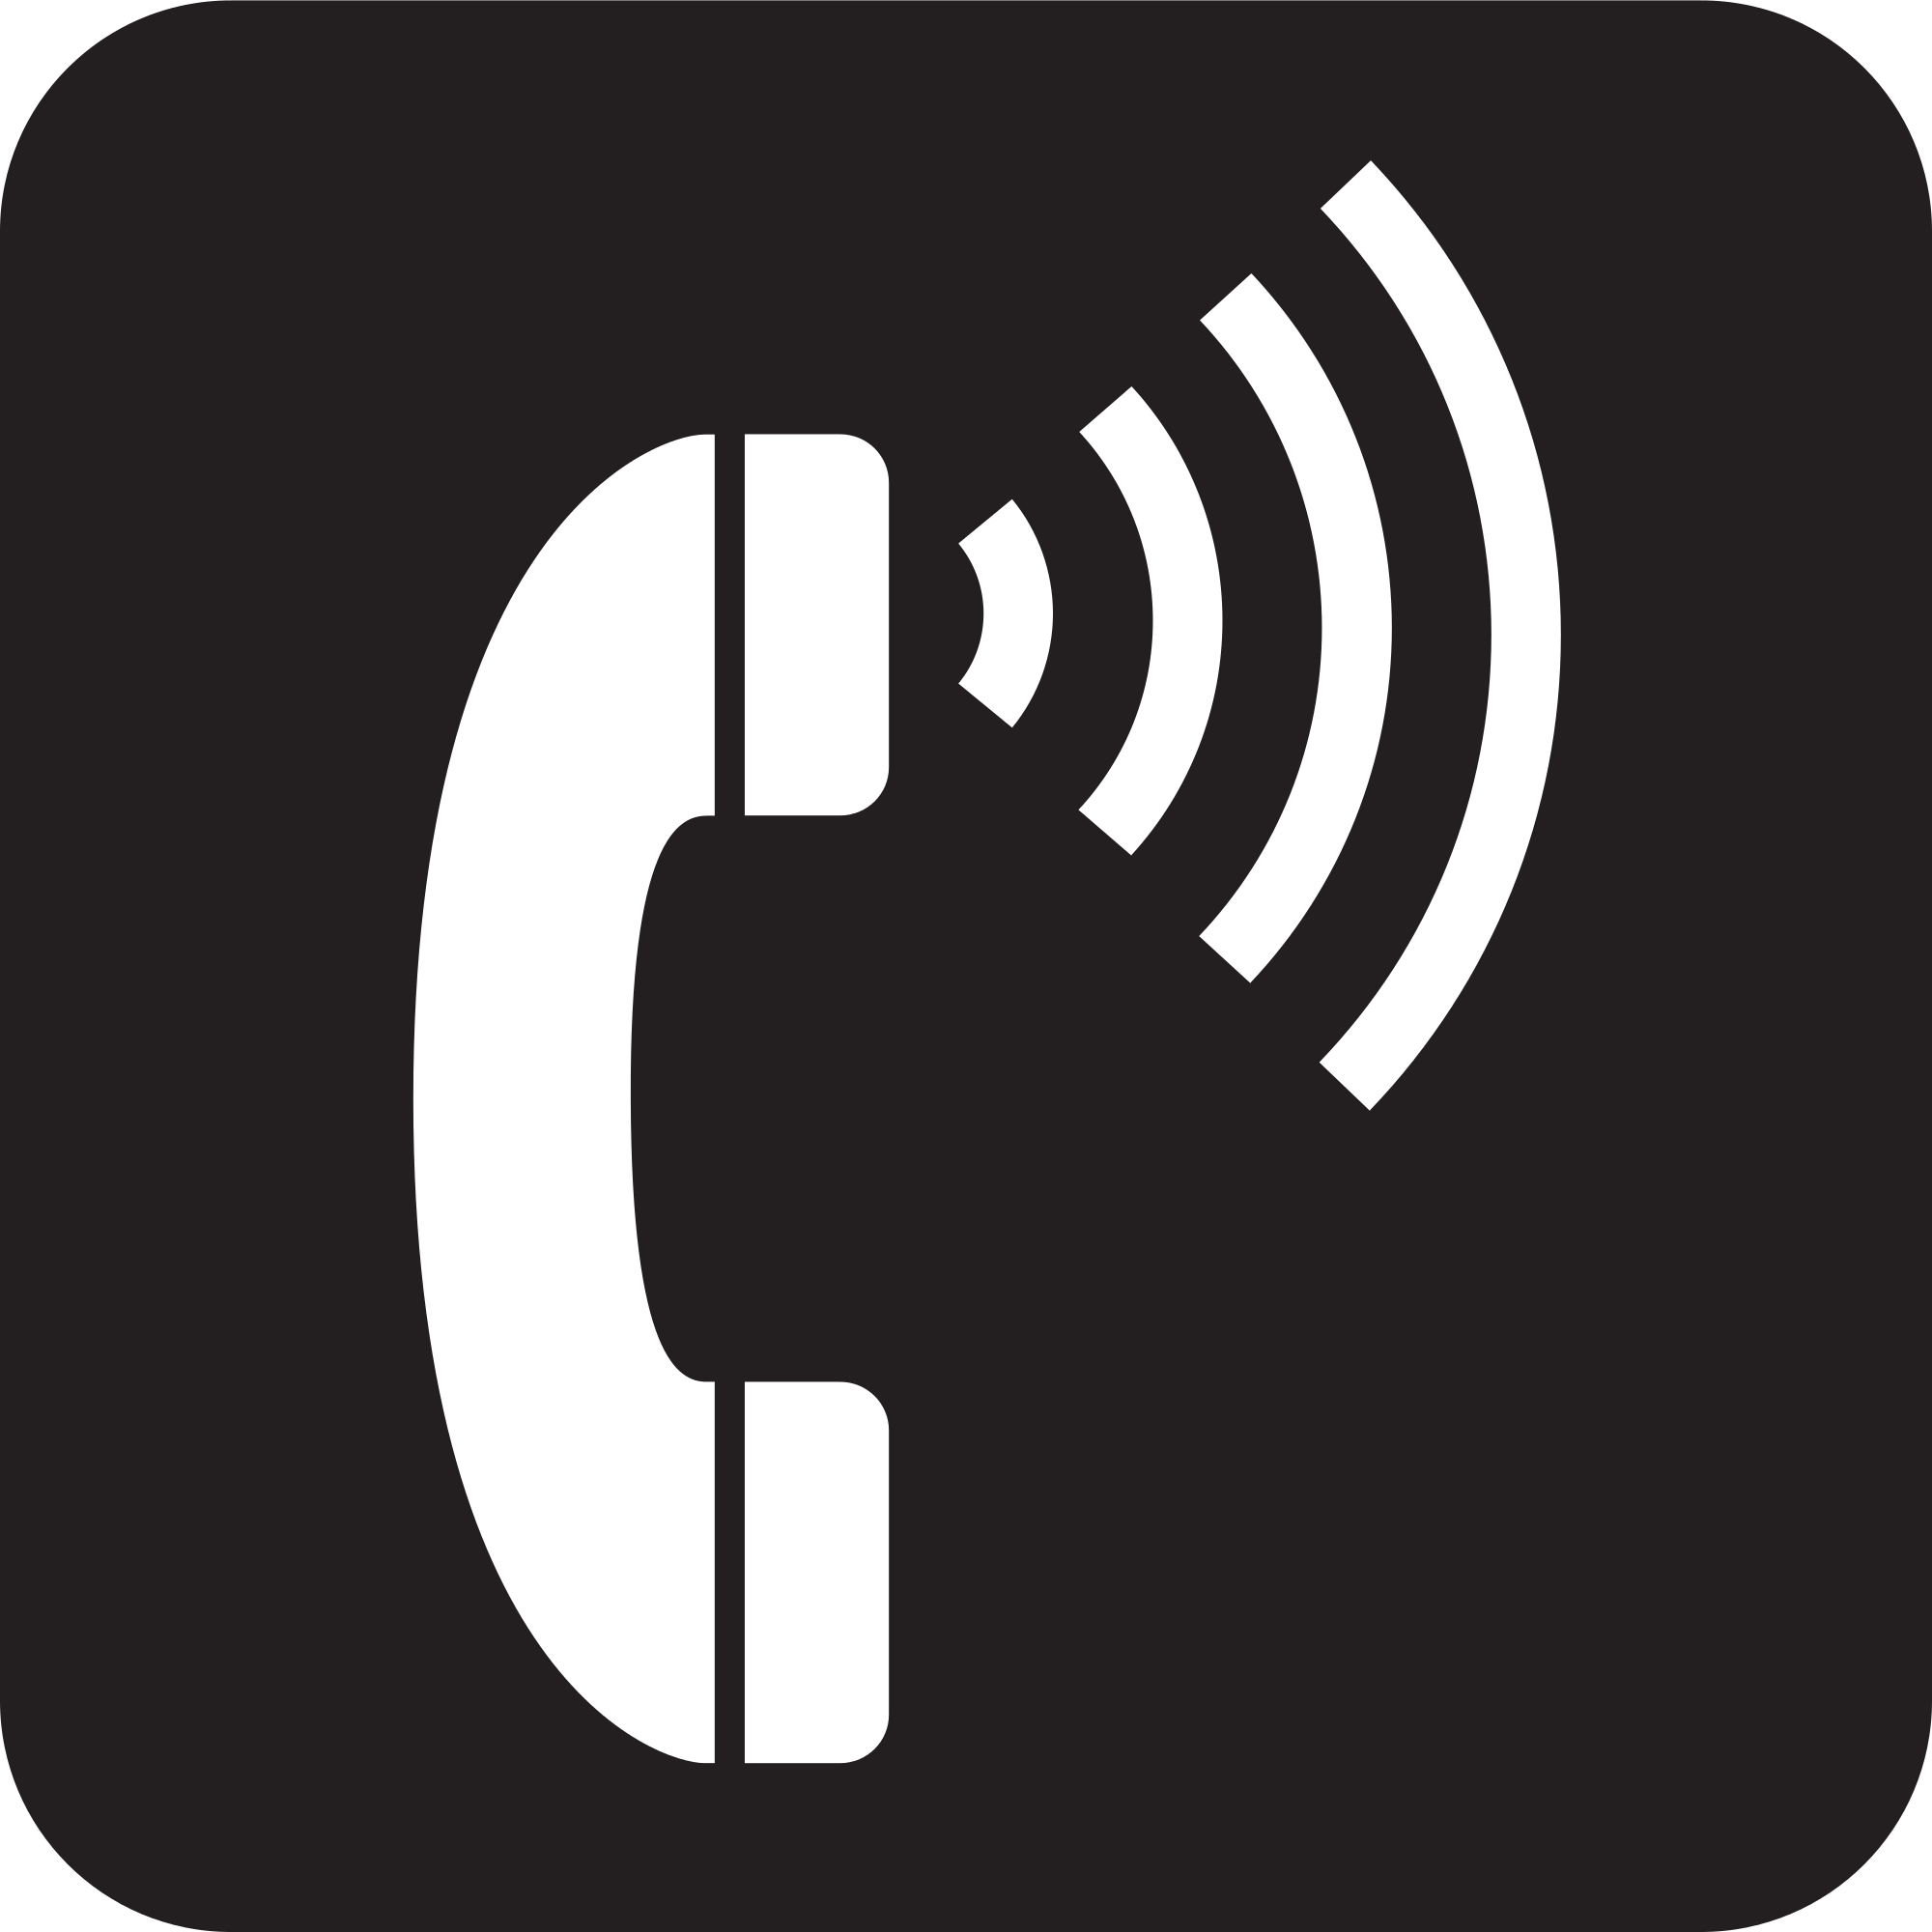 File:Pictograms-nps-accessibility-volume control telephone-2.svg ...